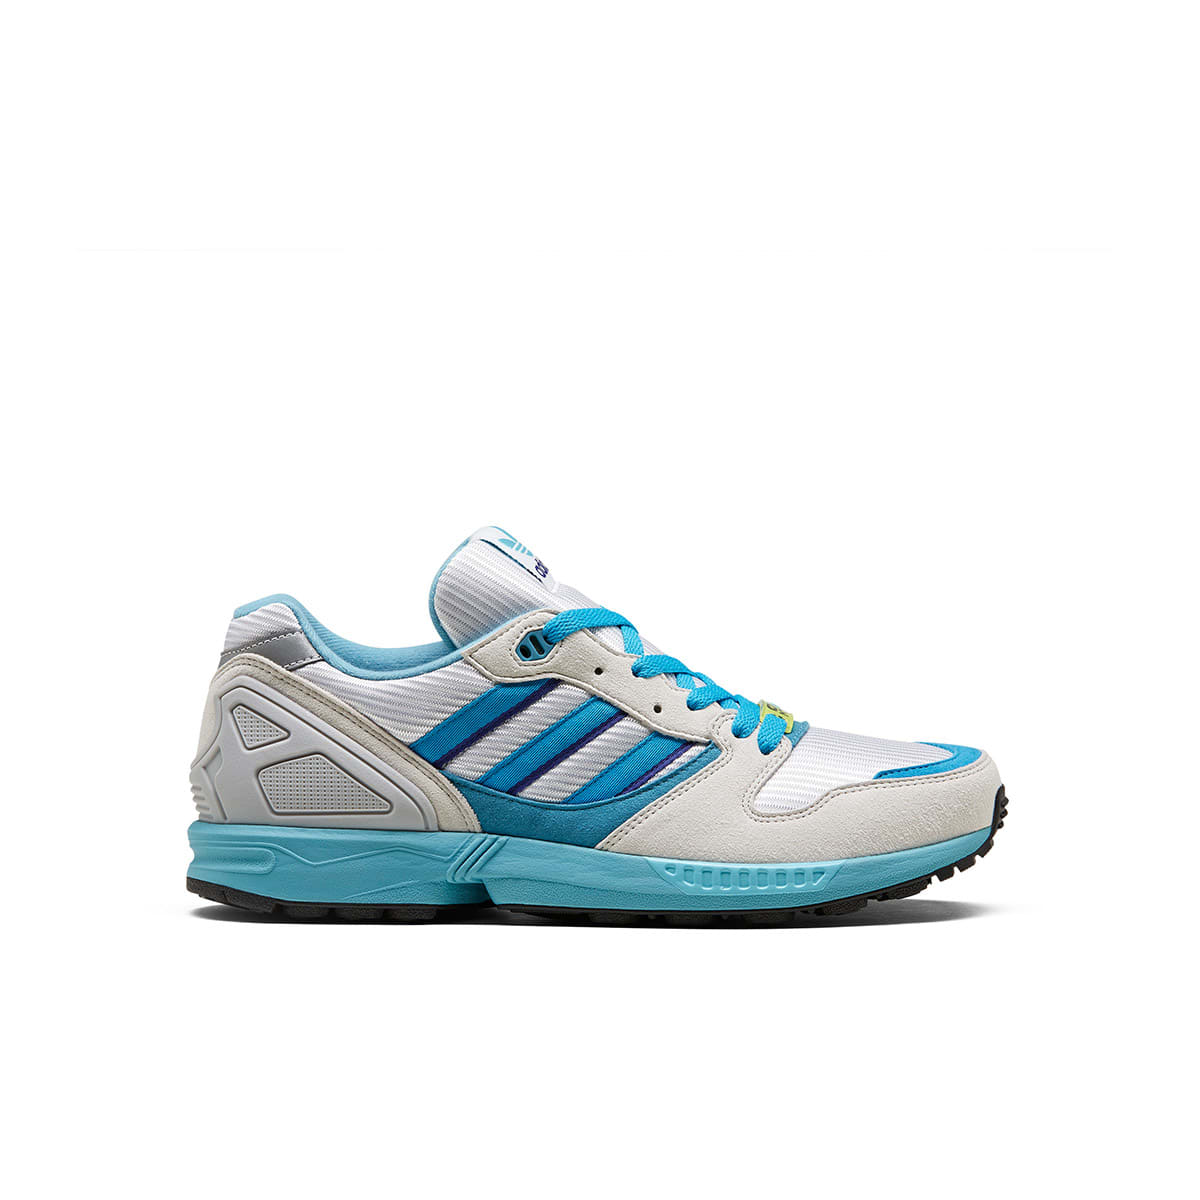 Adidas ZX 5000 OG (White & Blue) | END. Launches